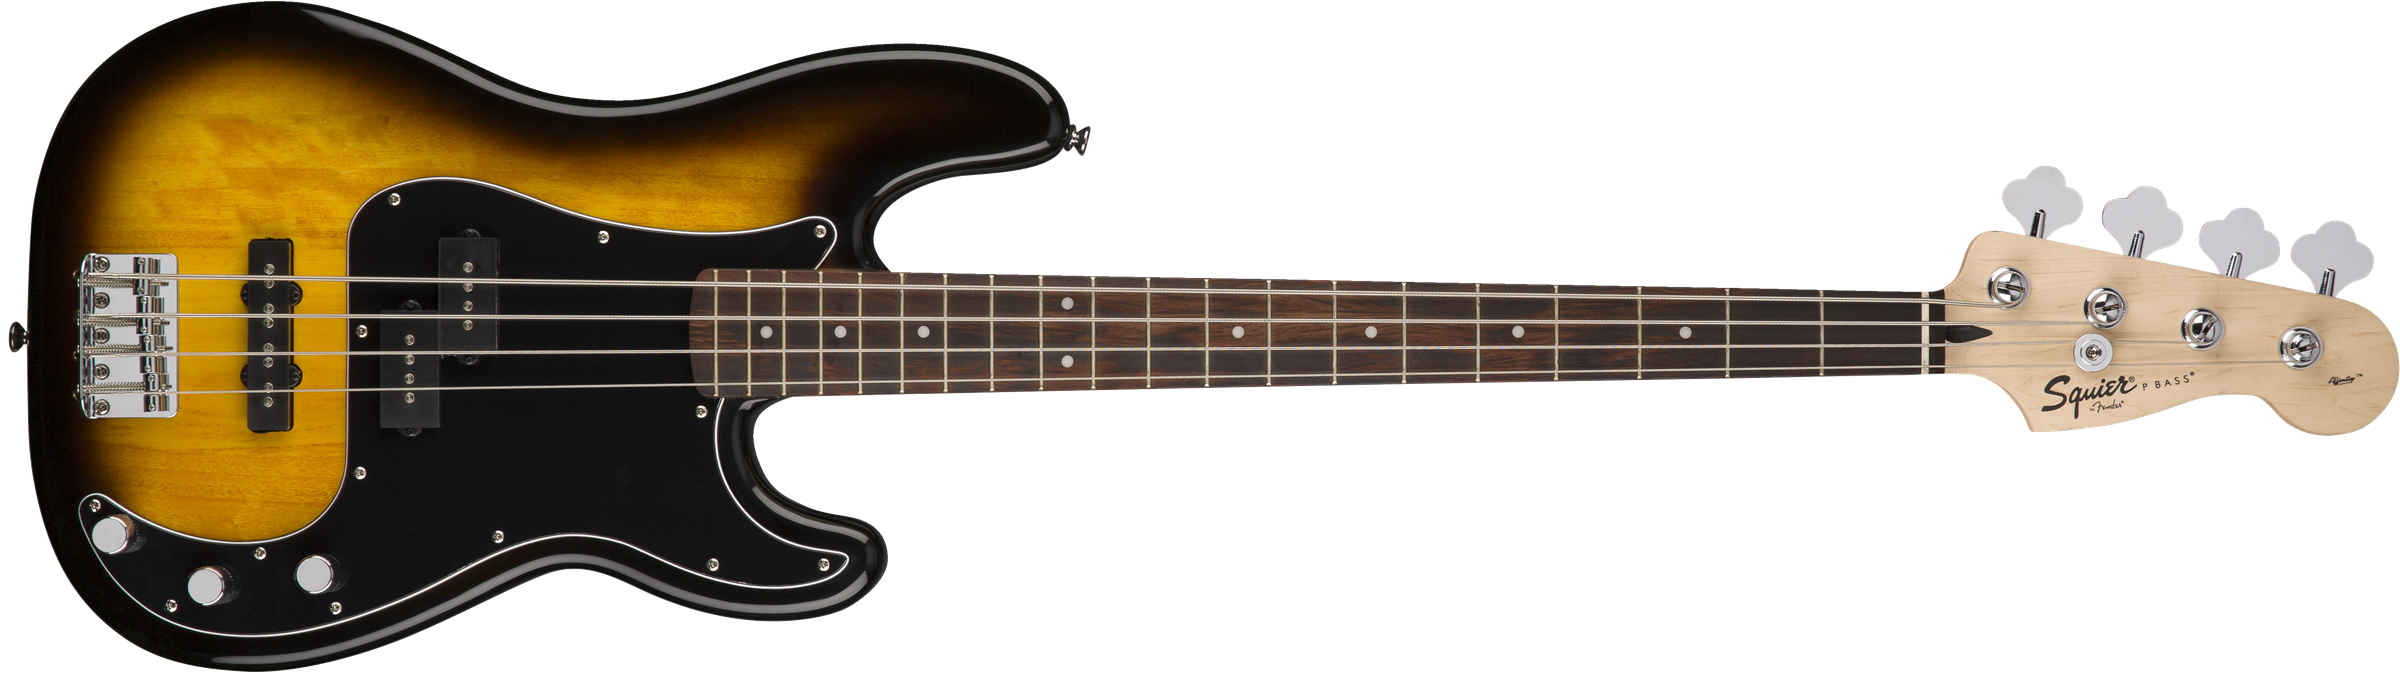 Squier Affinity Series Precision Bass Pj Pack (lau) - Brown Sunburst - Solid body electric bass - Variation 2